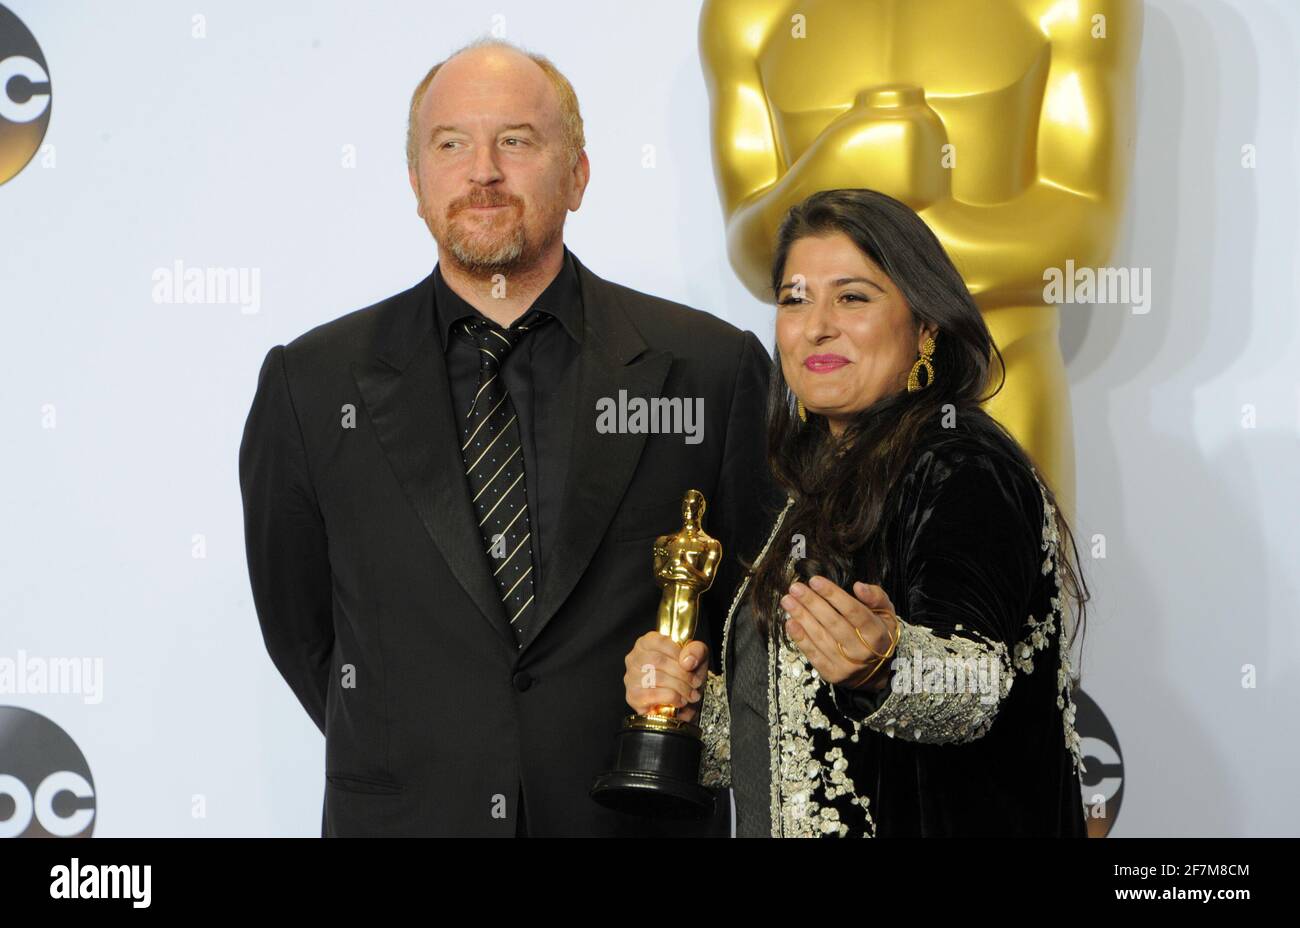 Louis CK, Oscar Winner Best Documentary Short Subject: Sharmeen  Obaid-Chinoy in the press room during The 88th Academy Awards ceremony, The  Oscars, held at the Dolby Theater, Sunday, February 28, 2016 in